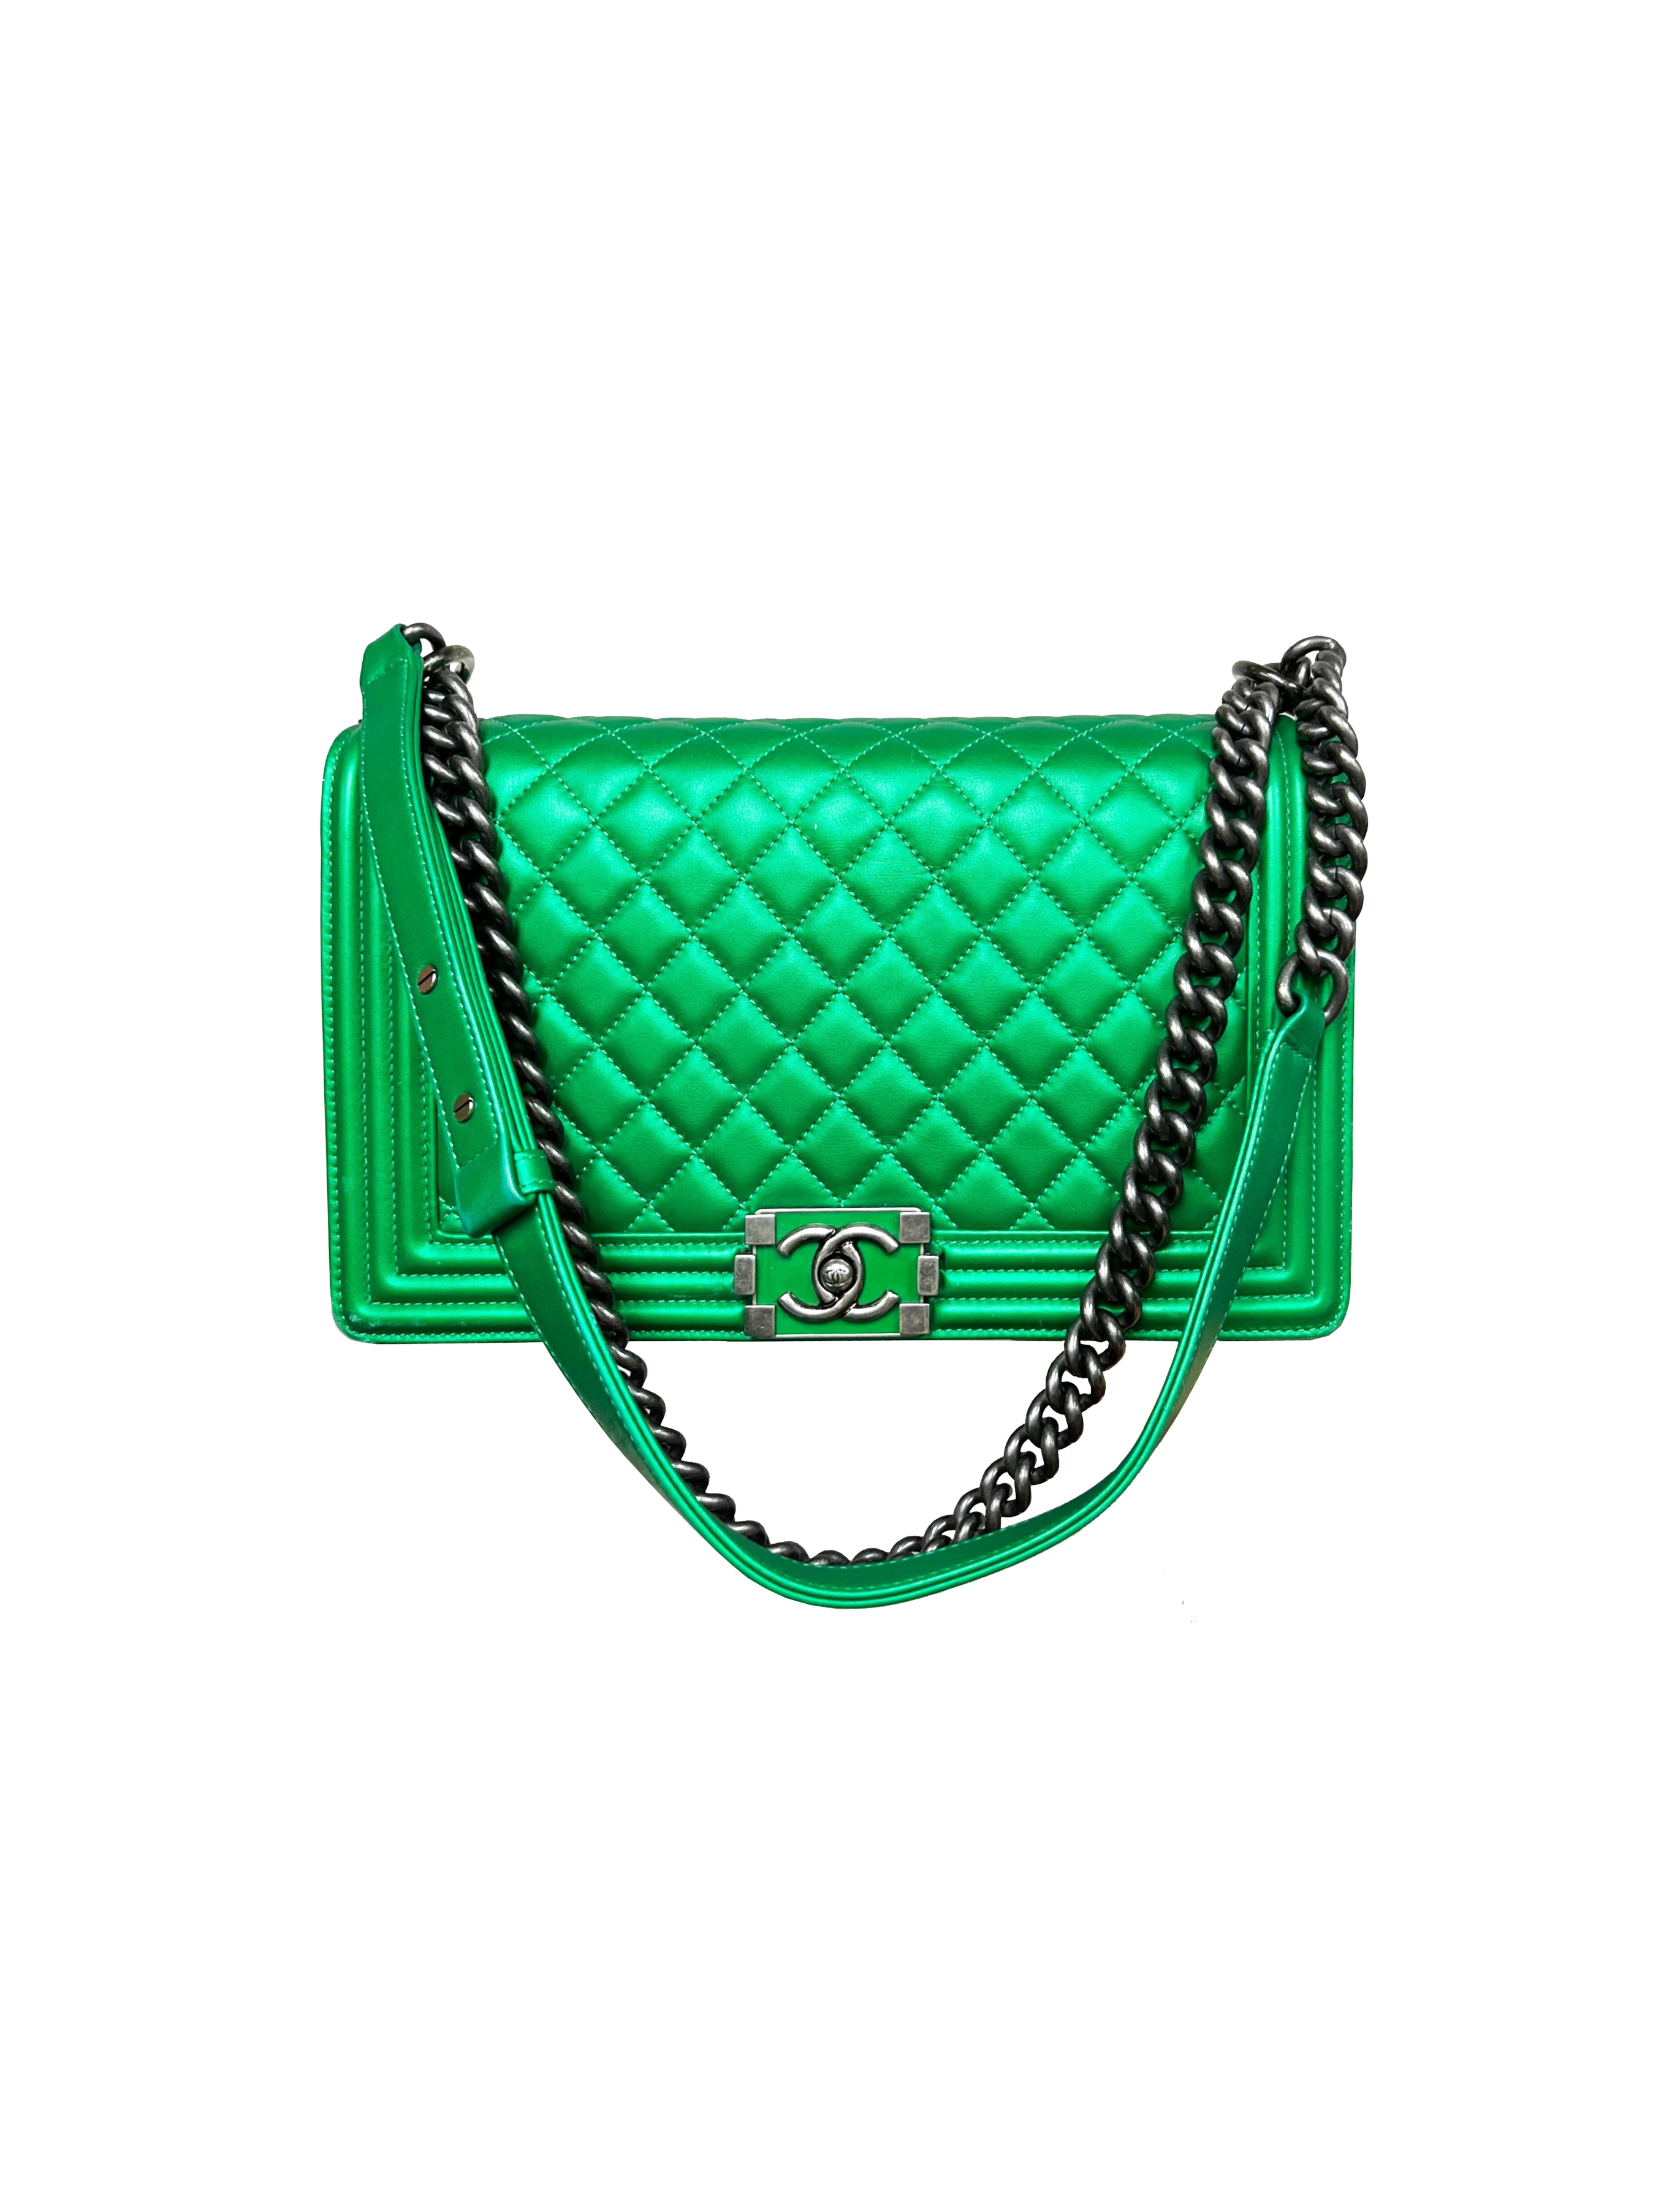 Chanel Metallic Green Quilted Lambskin Boy Bag Large Q6B01A1IG7006